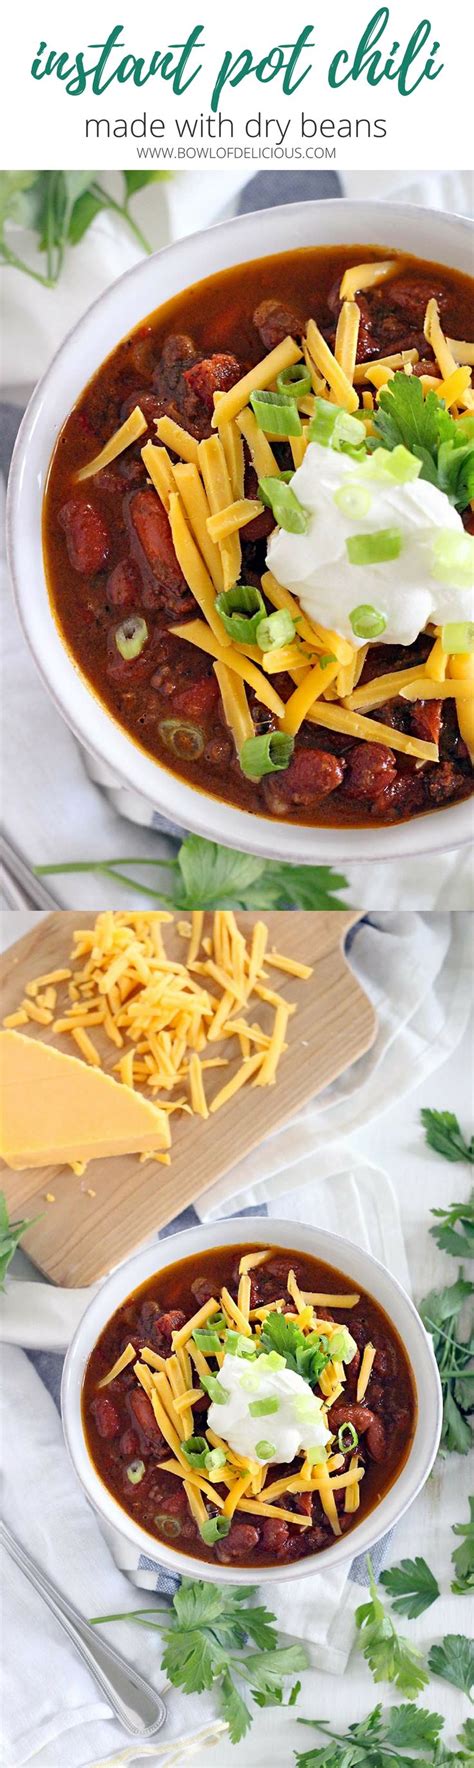 Three bean chili with ground beef swirls of flavor chili powder, onion, red kidney beans, ground beef, pinto beans and 29 more simple and easy ground beef chili happily unprocessed crushed tomatoes, chili powder, garlic powder, tomato juice, onion and 13 more This Instant Pot Chili is made with ground beef and dry ...